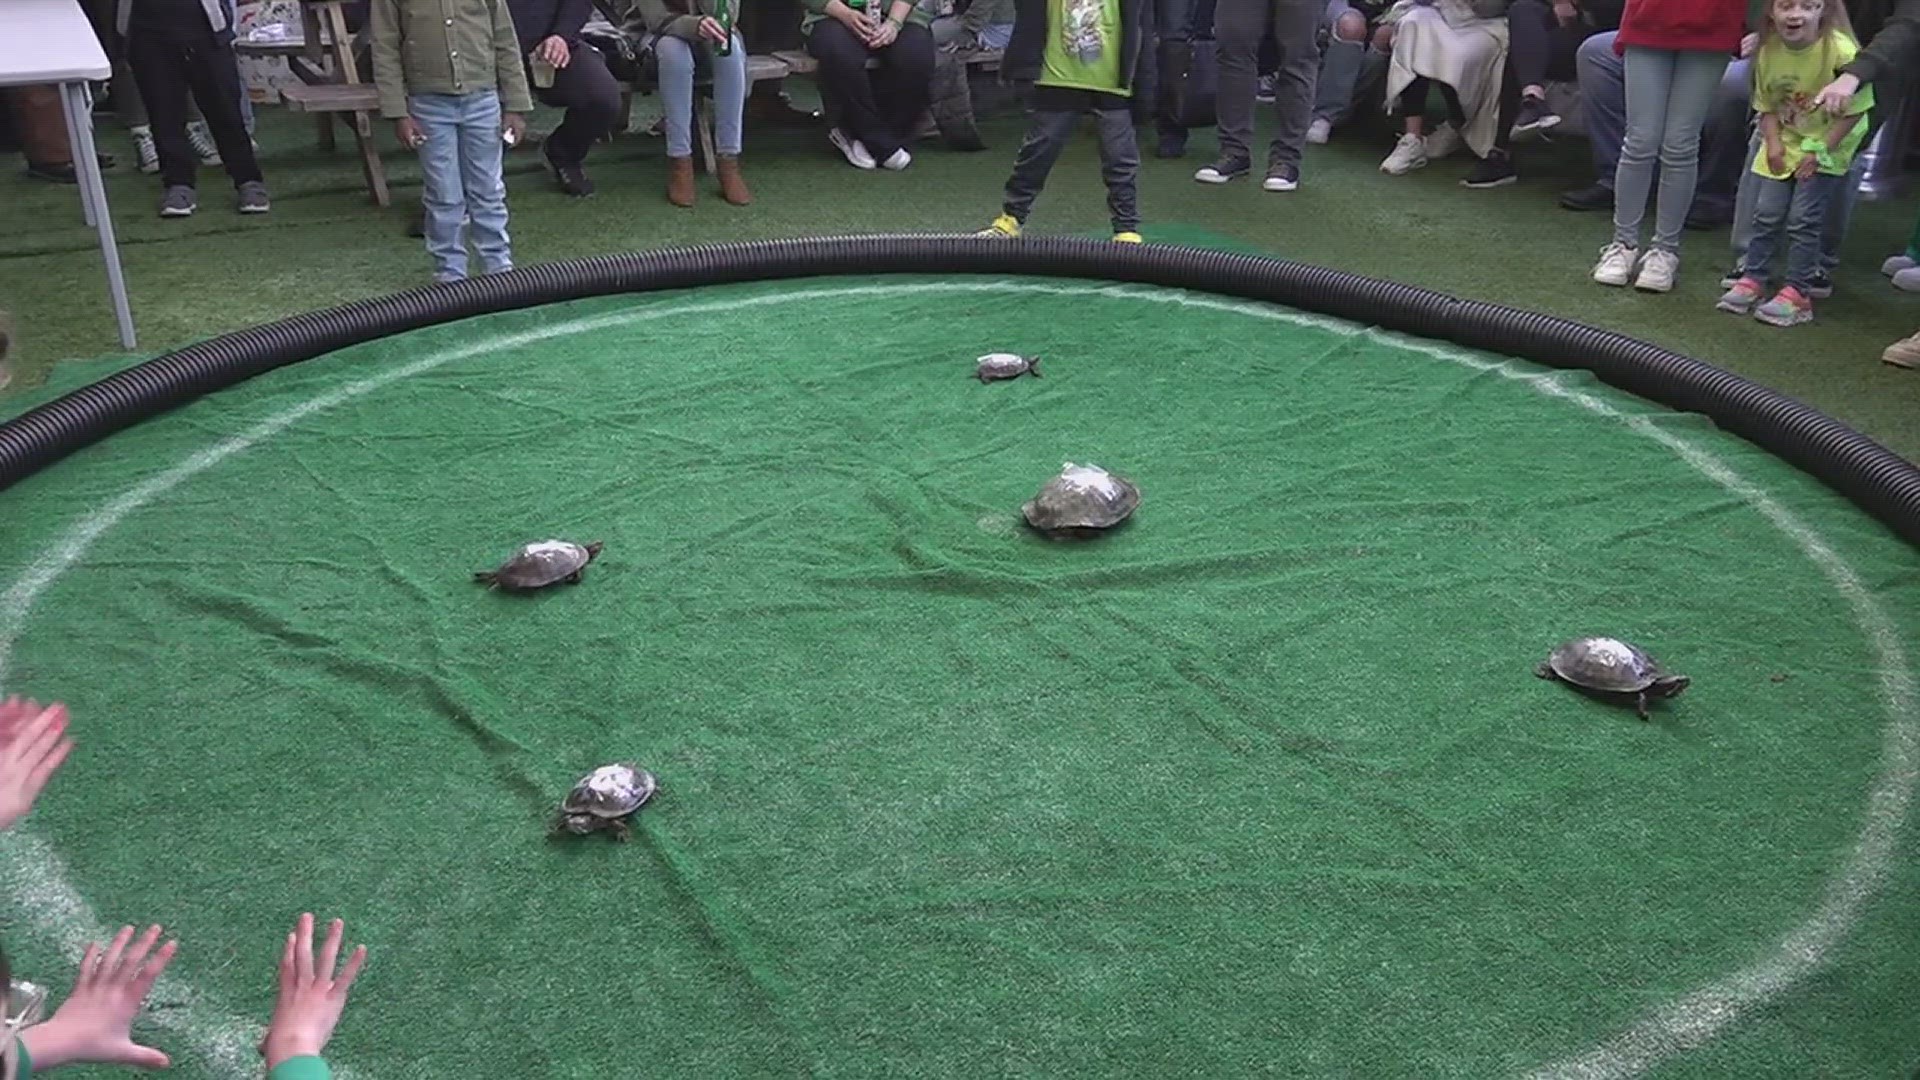 "We've done the turtle races for Madison's now for about 10 or 12 years."